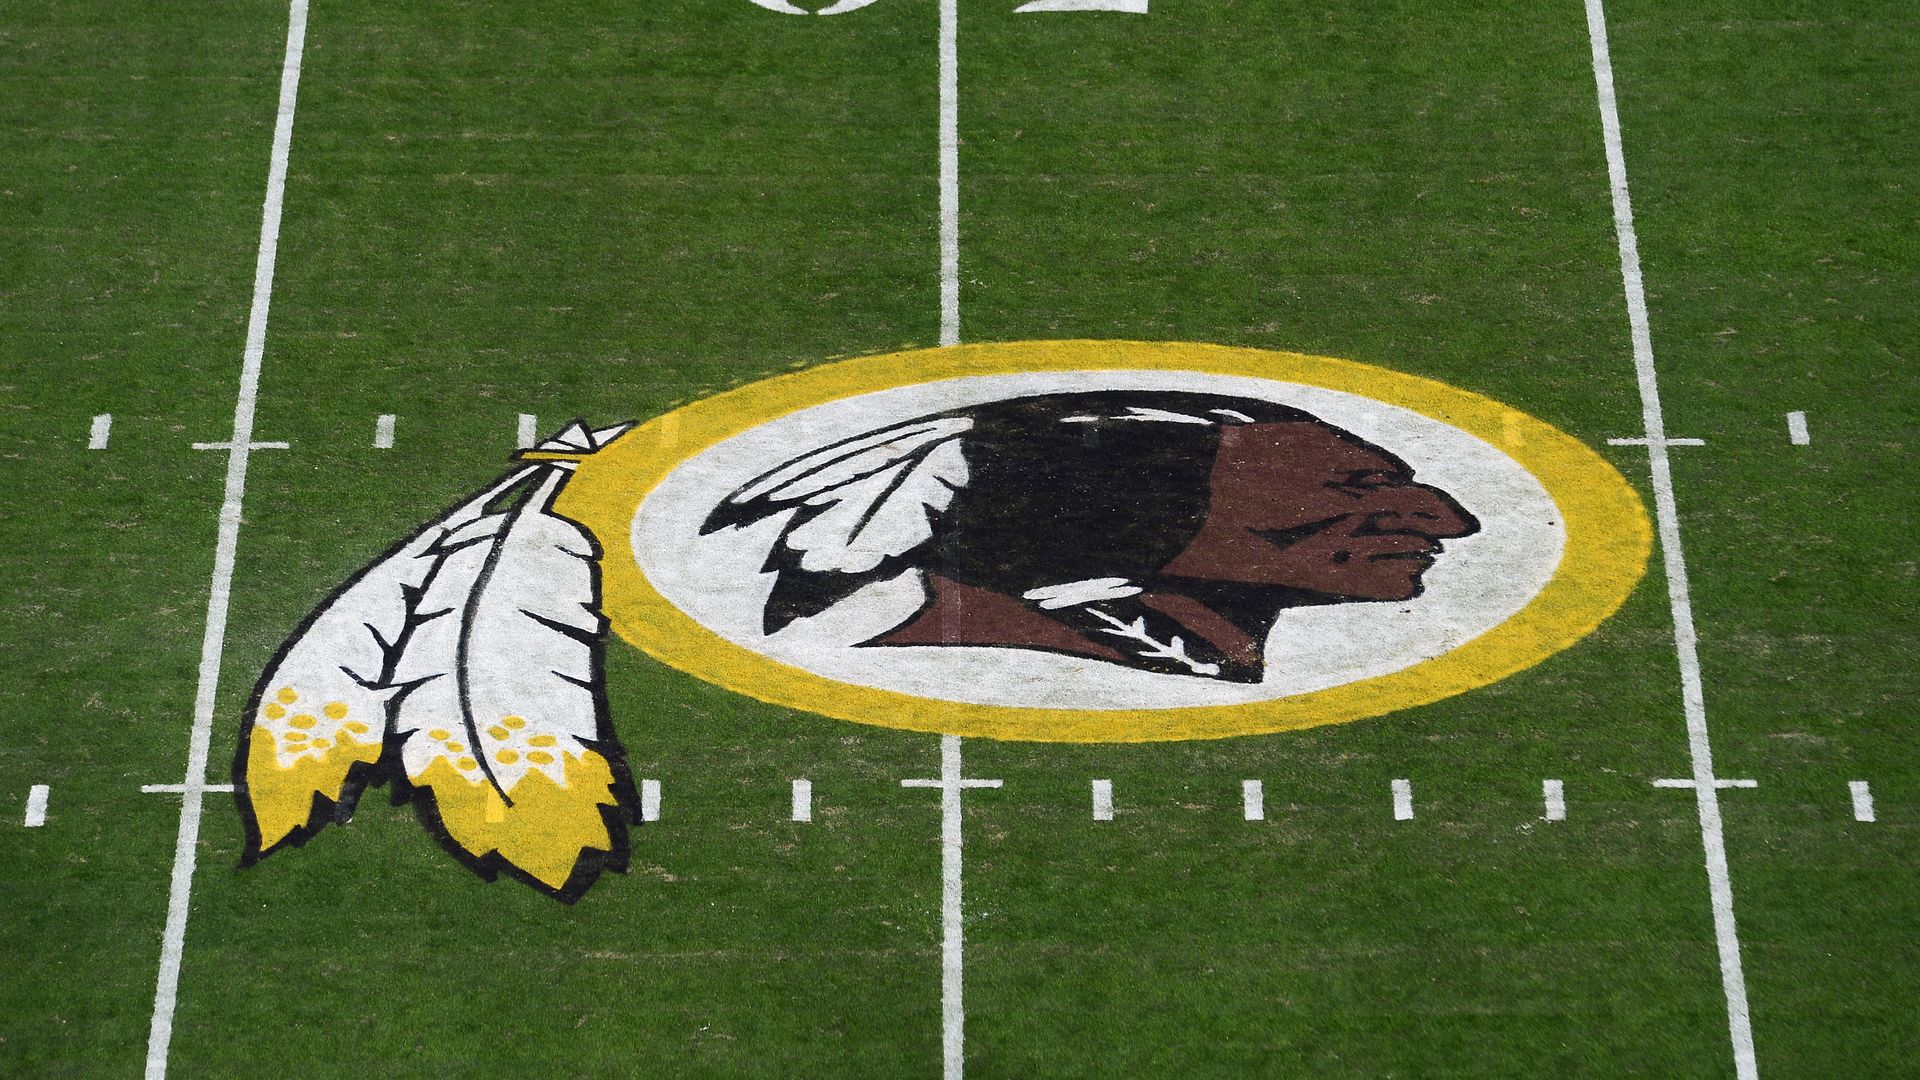 NFL team Redskin's logo on a football field by the 50-yard line